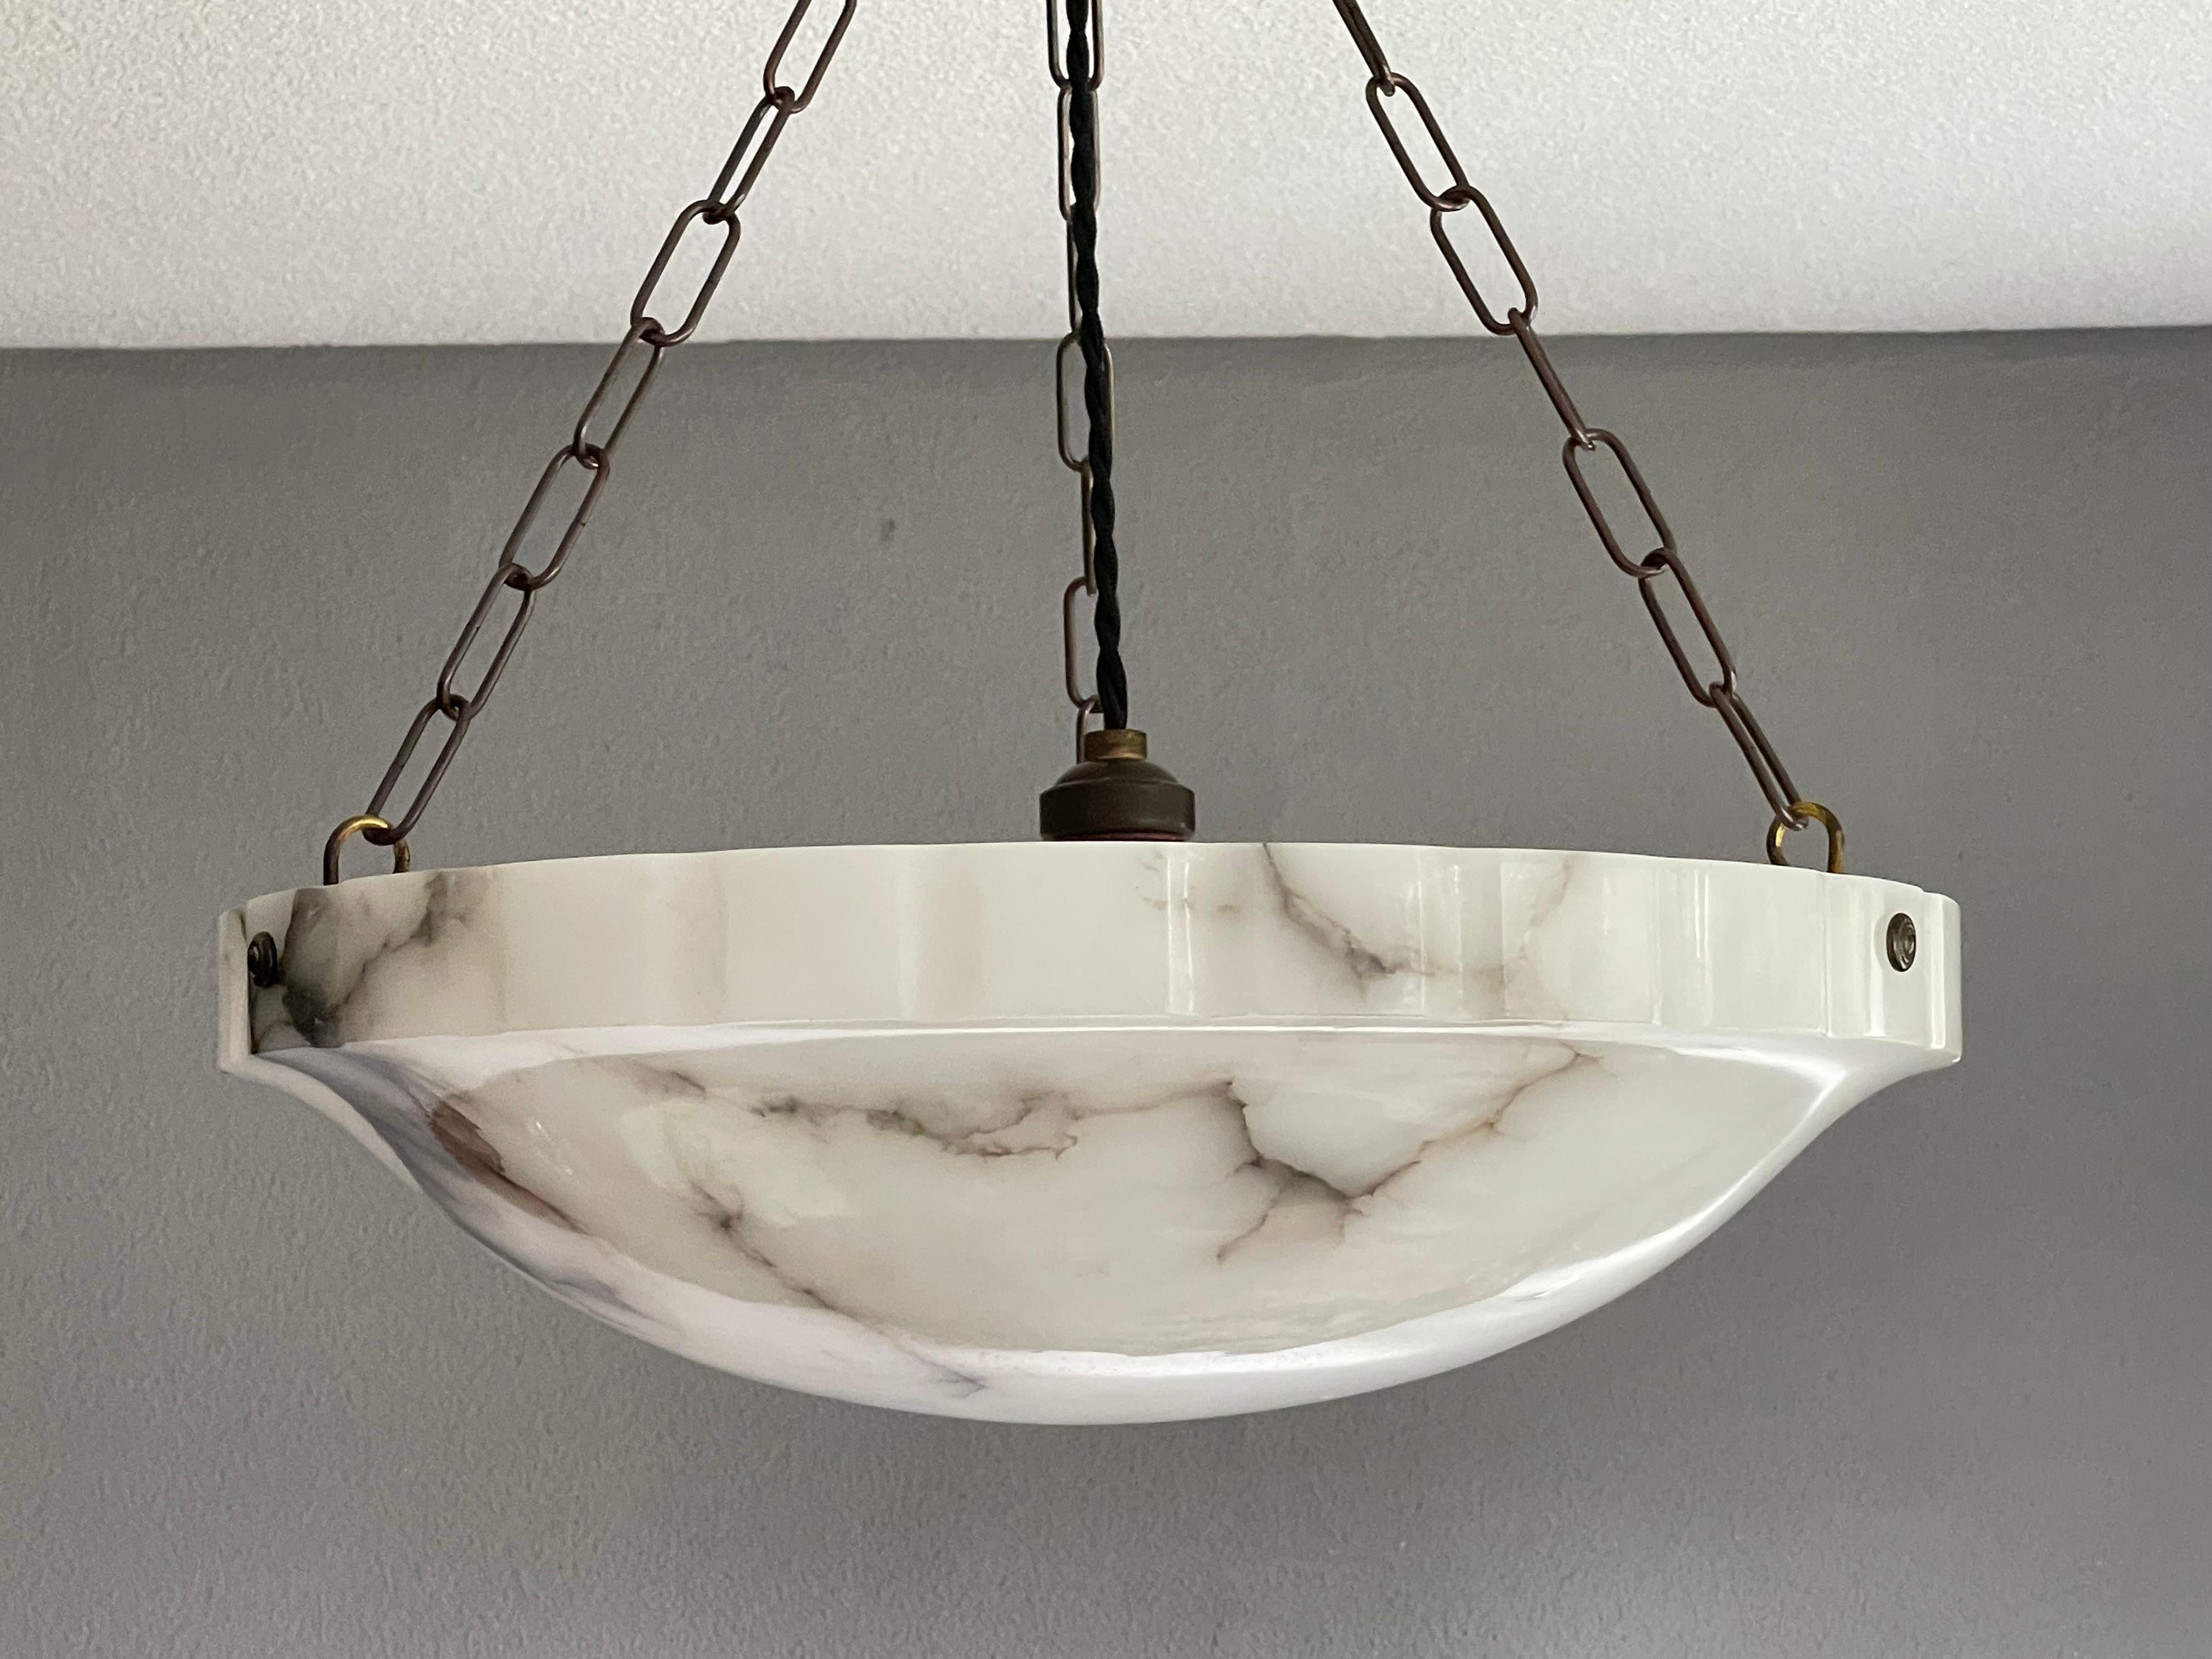 Good size and mint alabaster pendant from the heydays of the Art Deco era.

This rare shape and ideal size Art Deco light fixture comes with a stunning and mint condition, polished alabaster shade. This practical size and striking alabaster shade